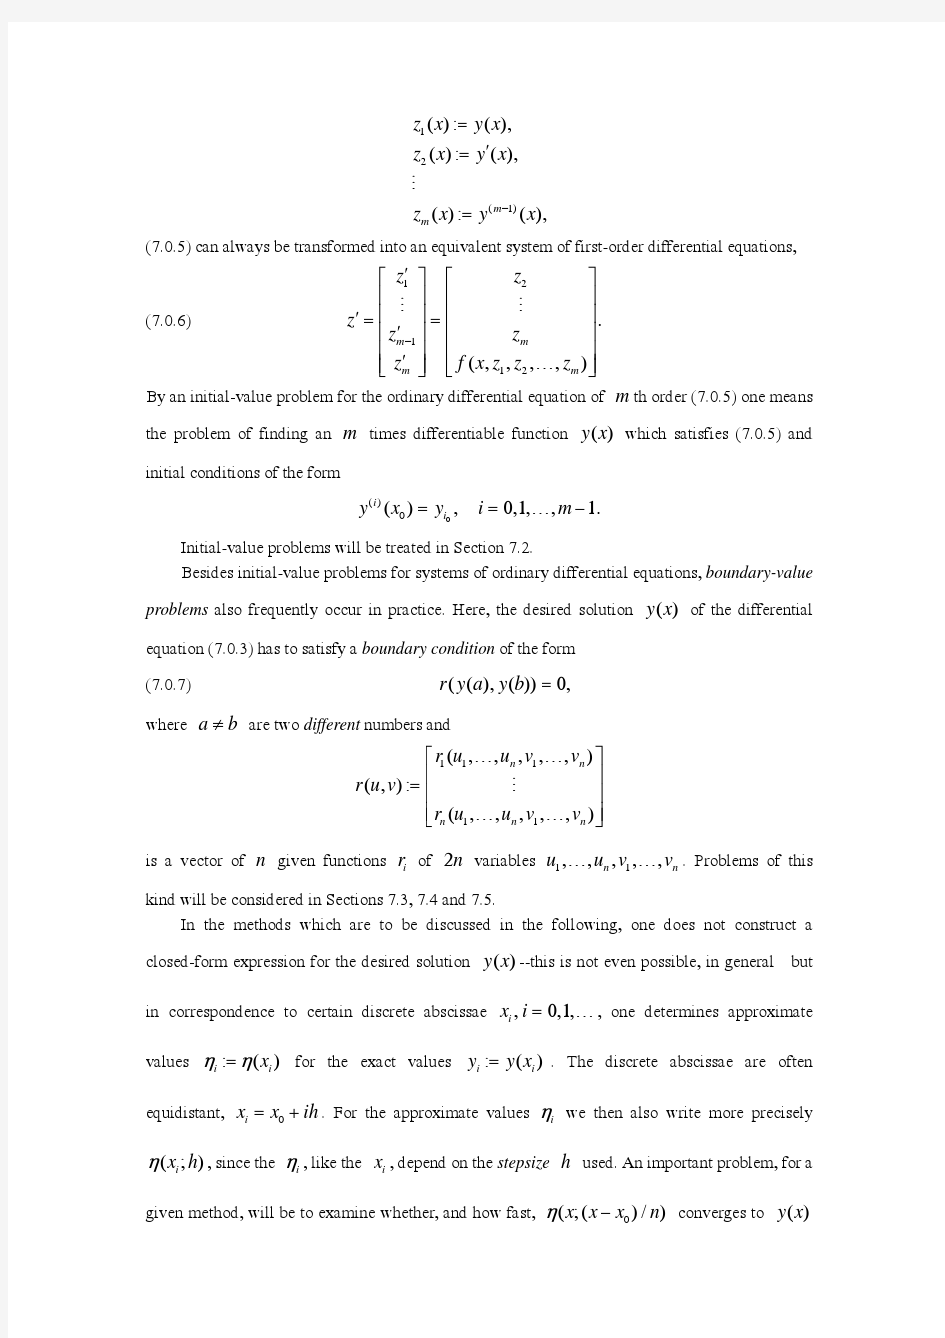 7 Ordinary Differential Equations